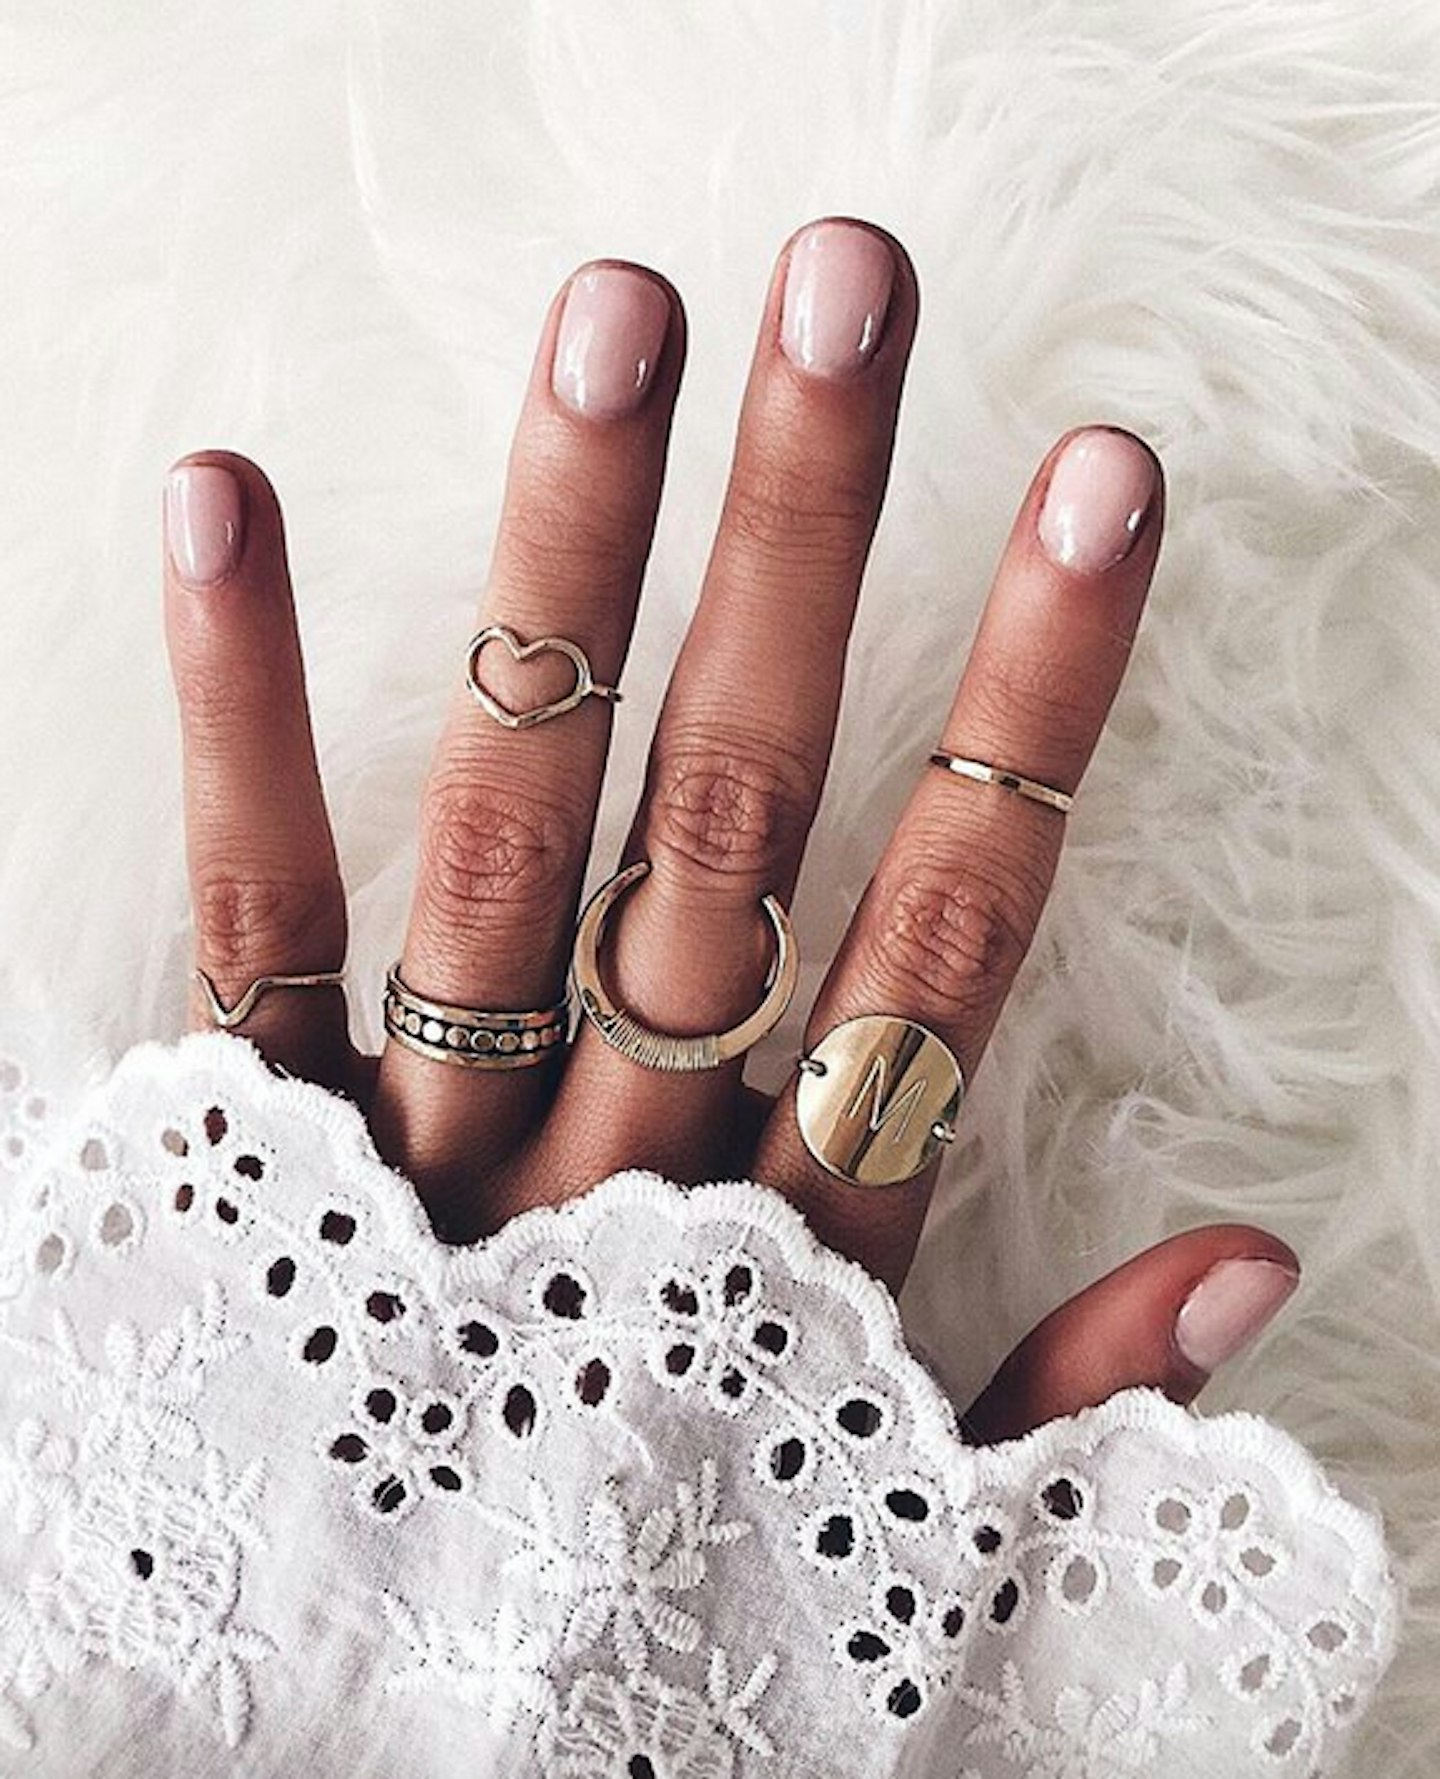 Rosé Nails Are This Summer's Biggest Manicure Trend | Beauty & Hair ...